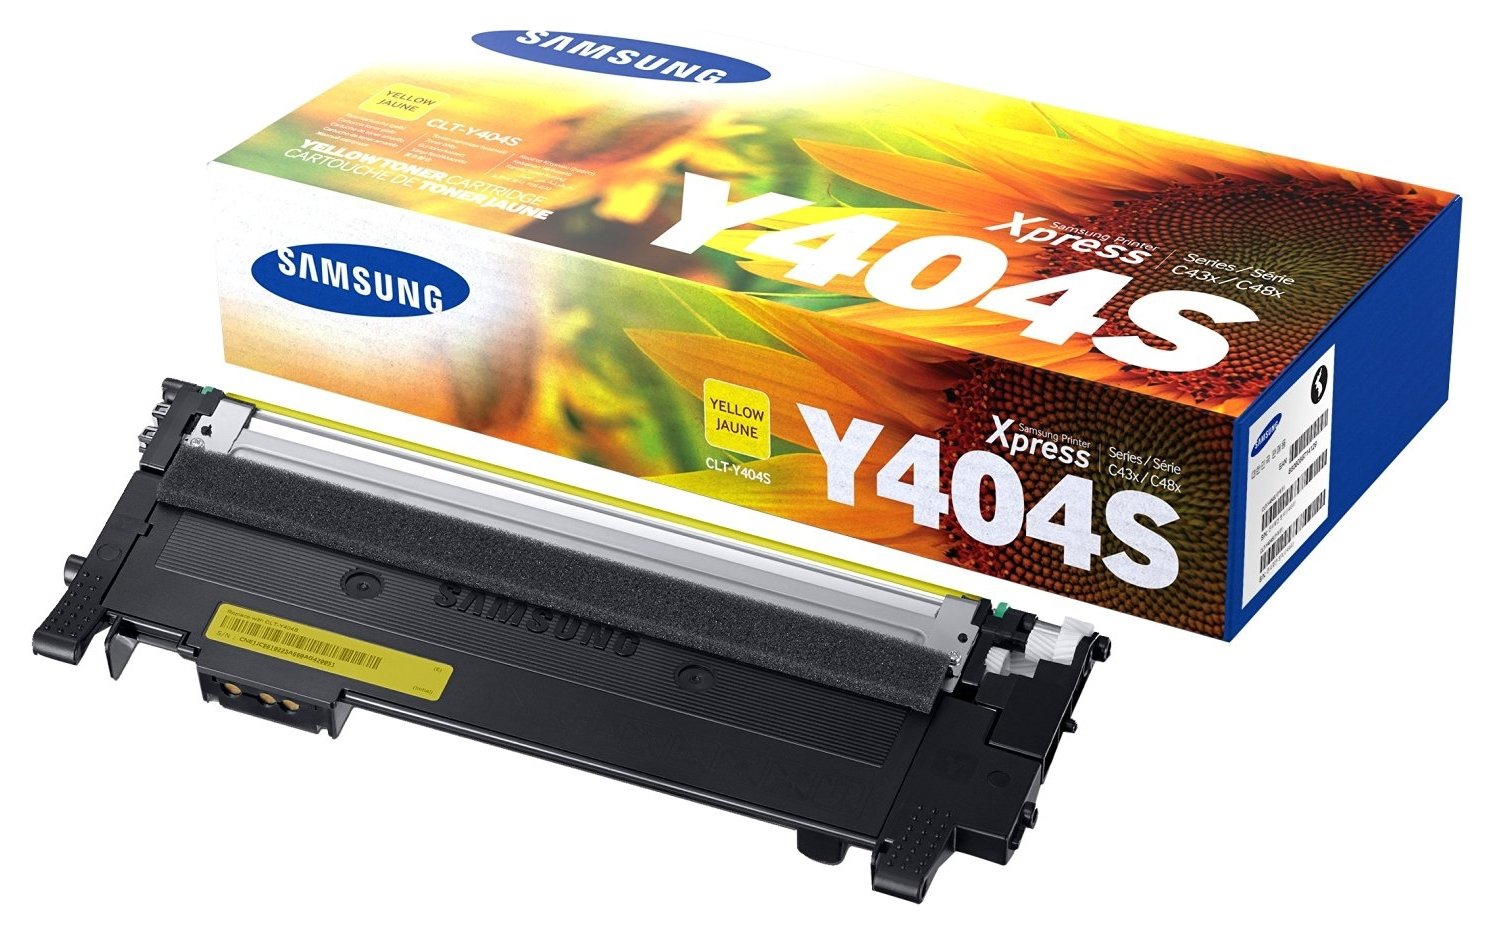 Samsung Y404S Yellow Toner. Review